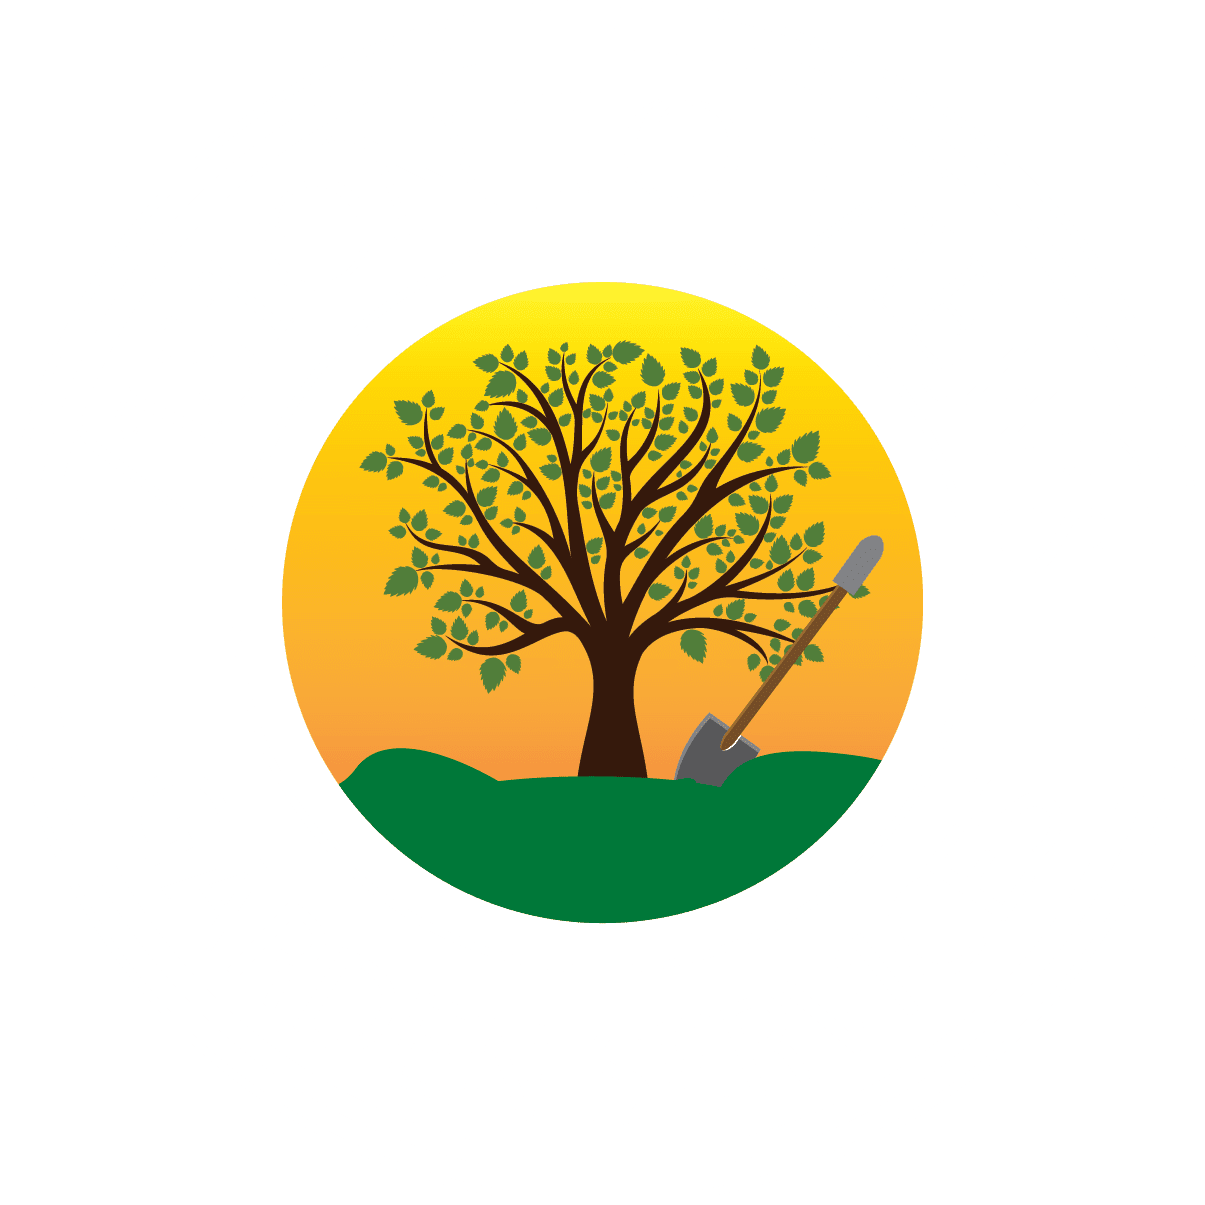 Vision To View's - Garden Service's